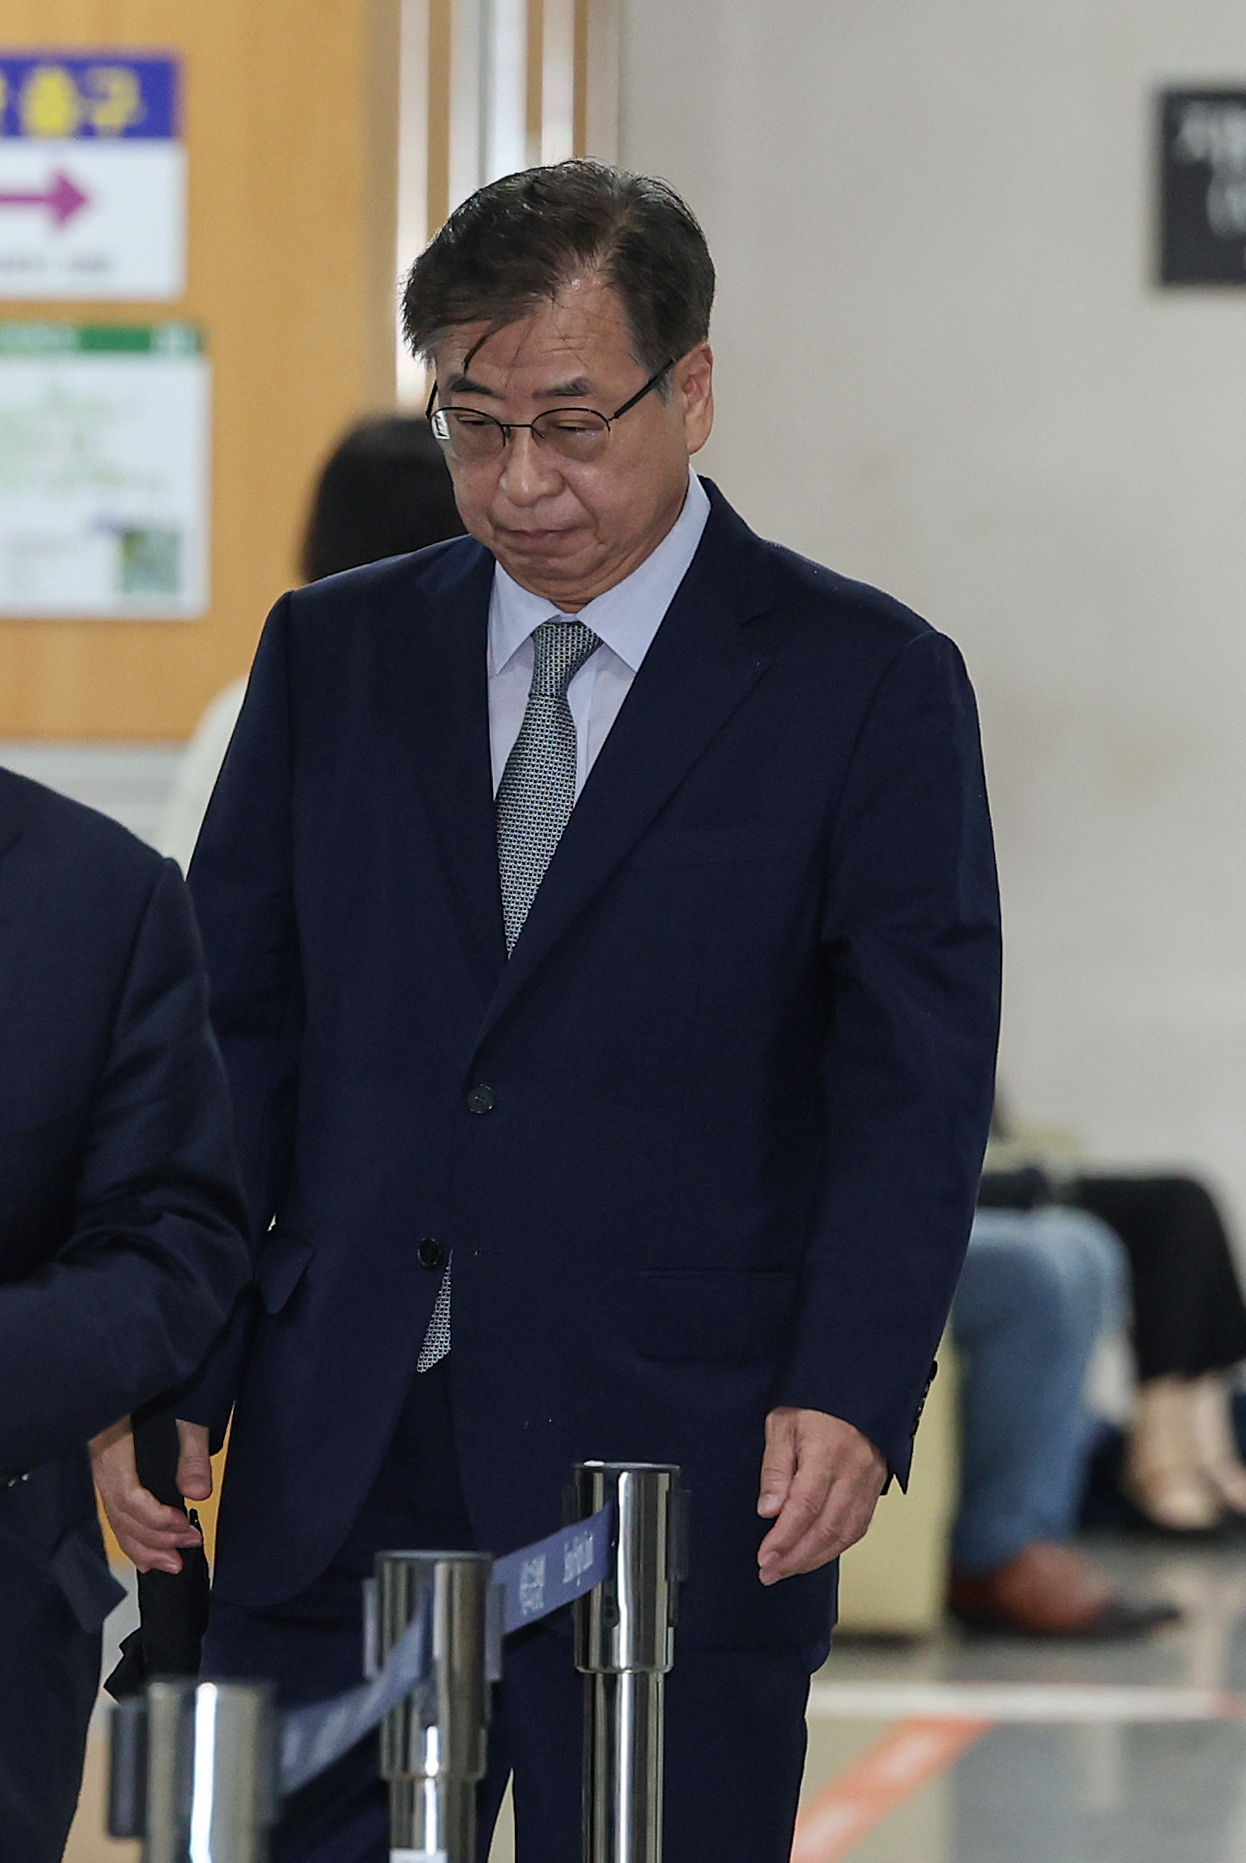 Suh Hoon, ex-national security chief at Moon Jae-in presidential office, appears at the Seoul central district court on July 14. (Yonhap)